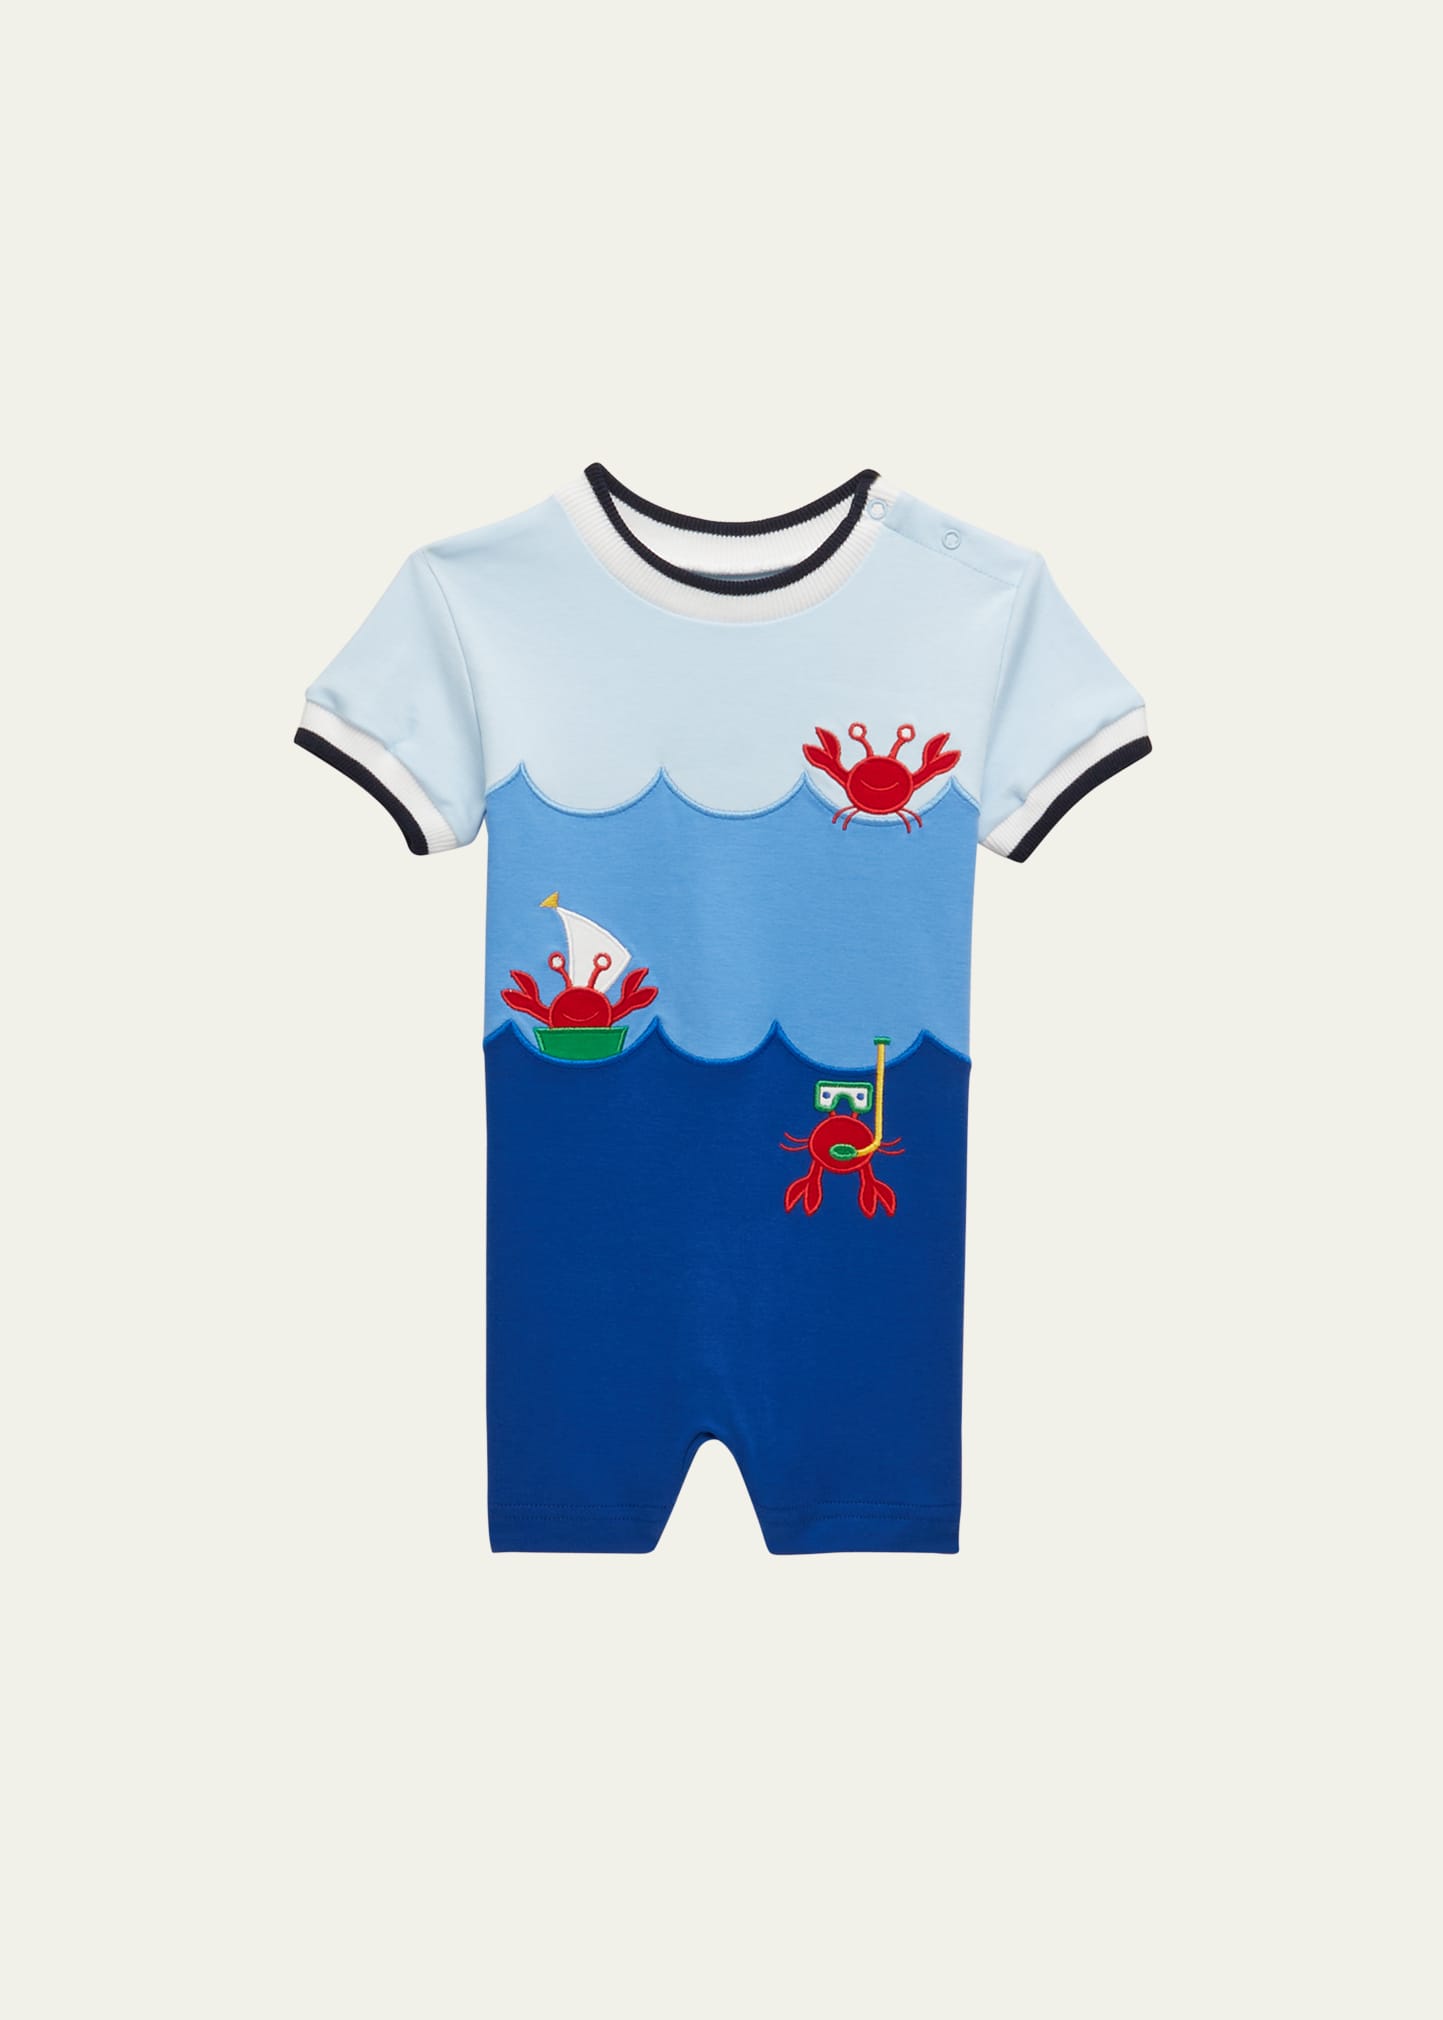 Florence Eiseman Boy's Knit Embroidered Crabs Shortall, Size 3M-24M